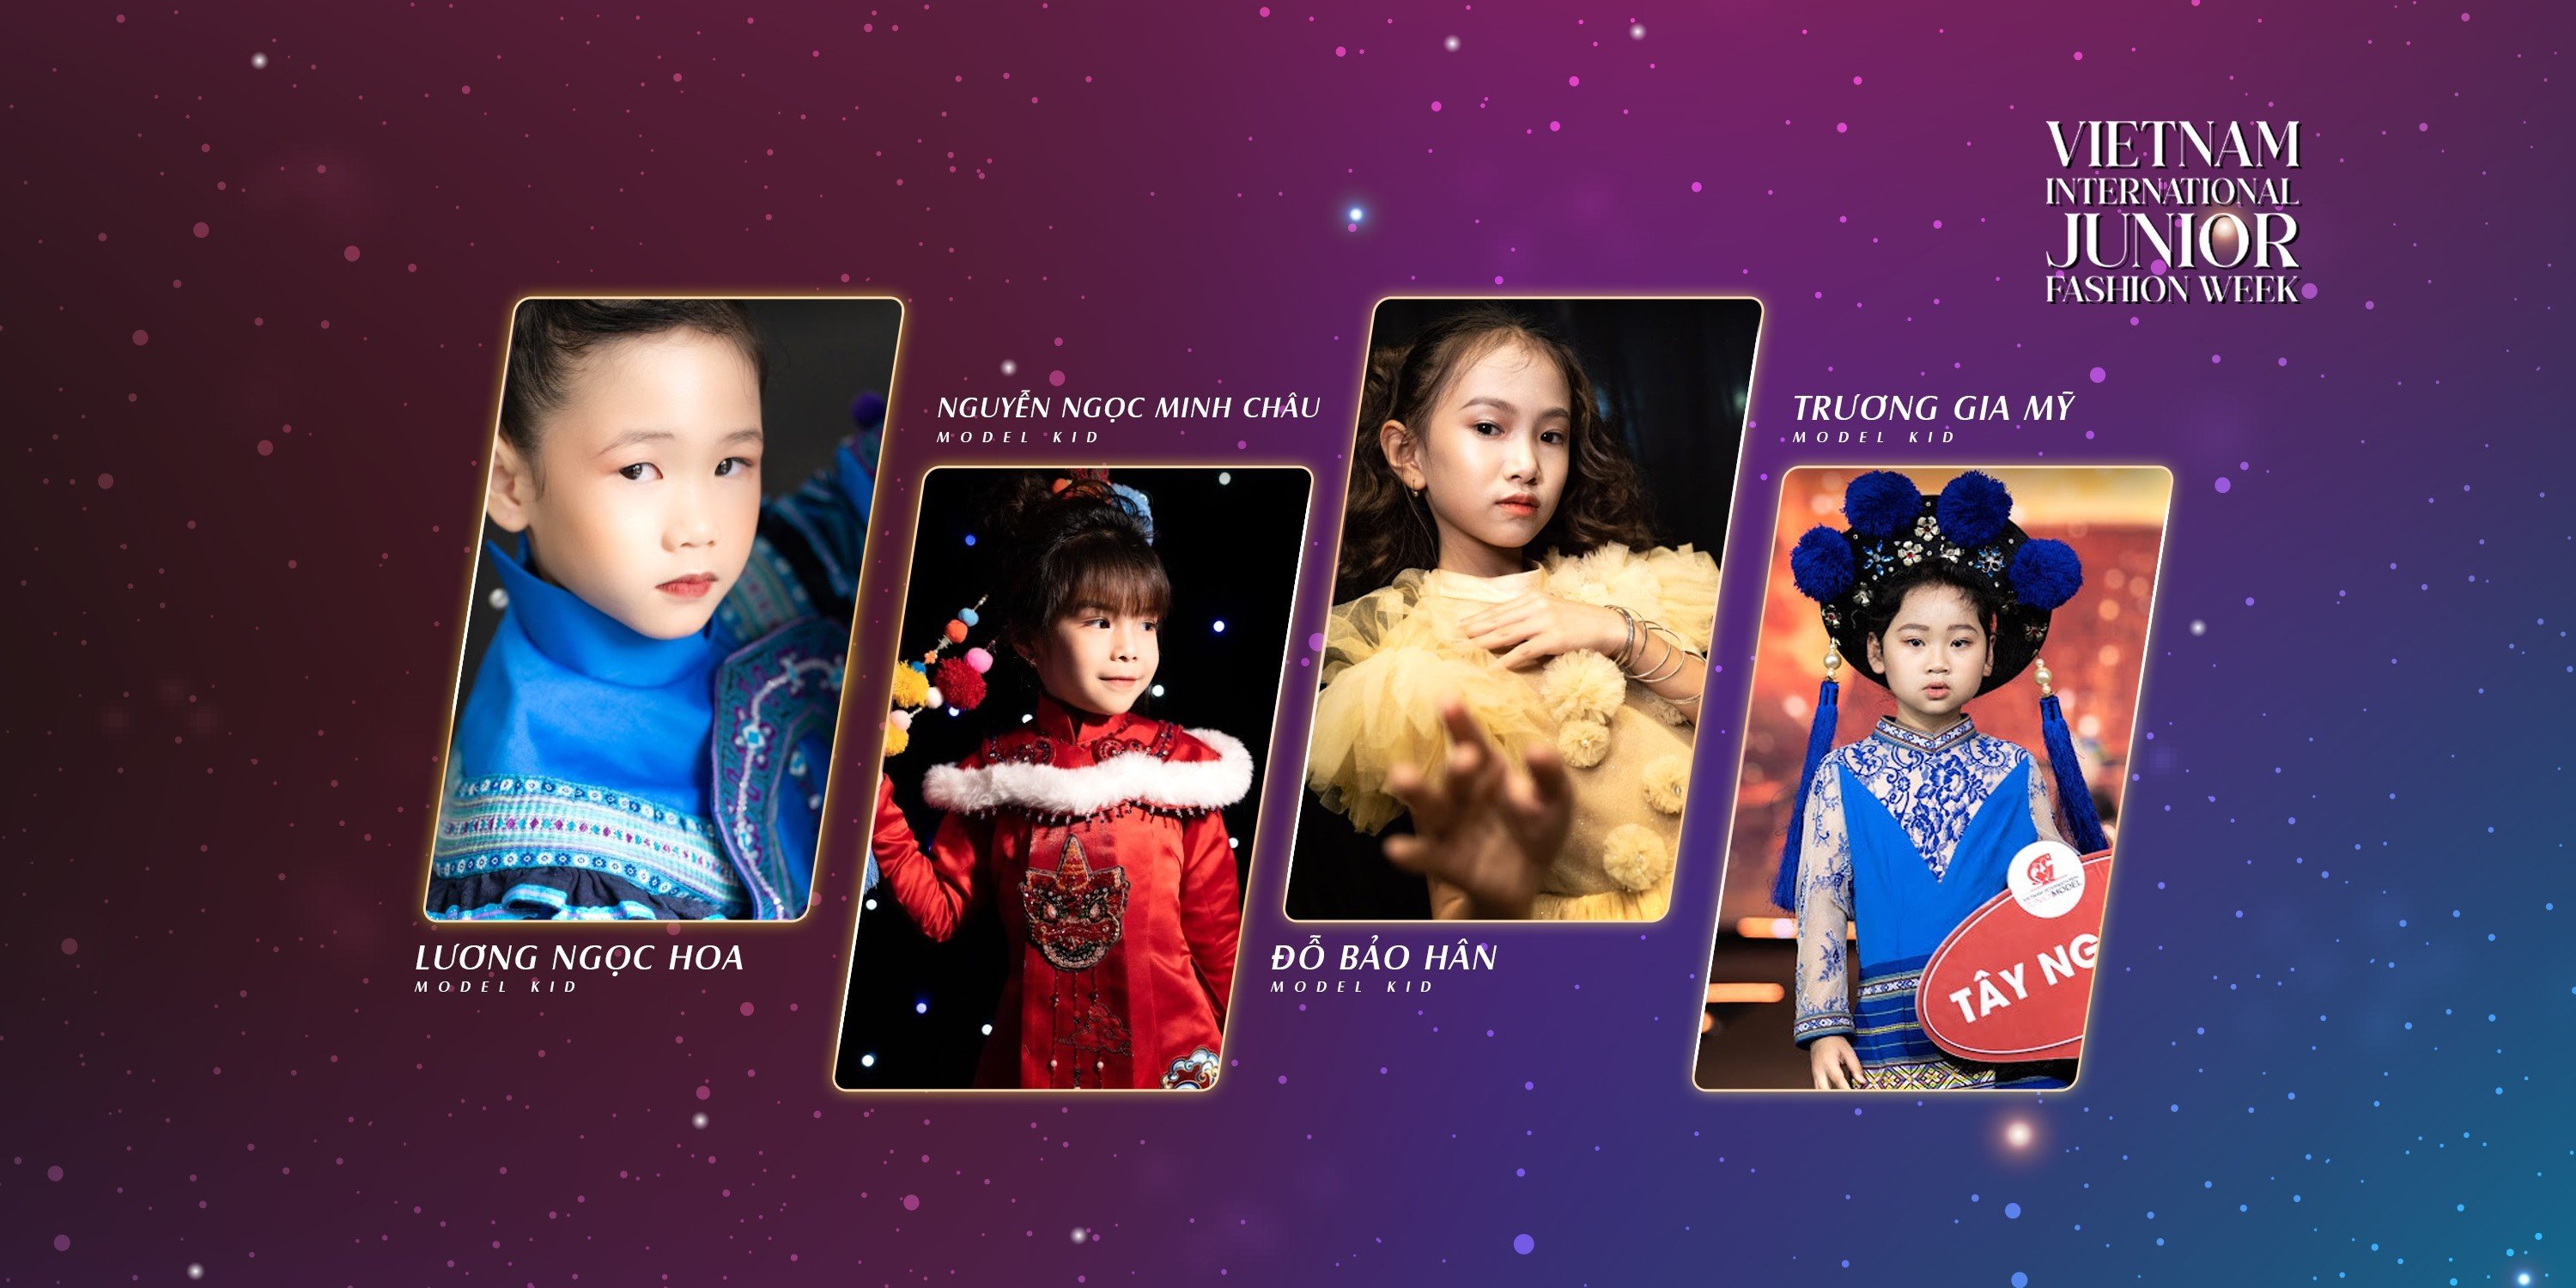 The first four child models will showcase the "S Journey Vietnam" collection